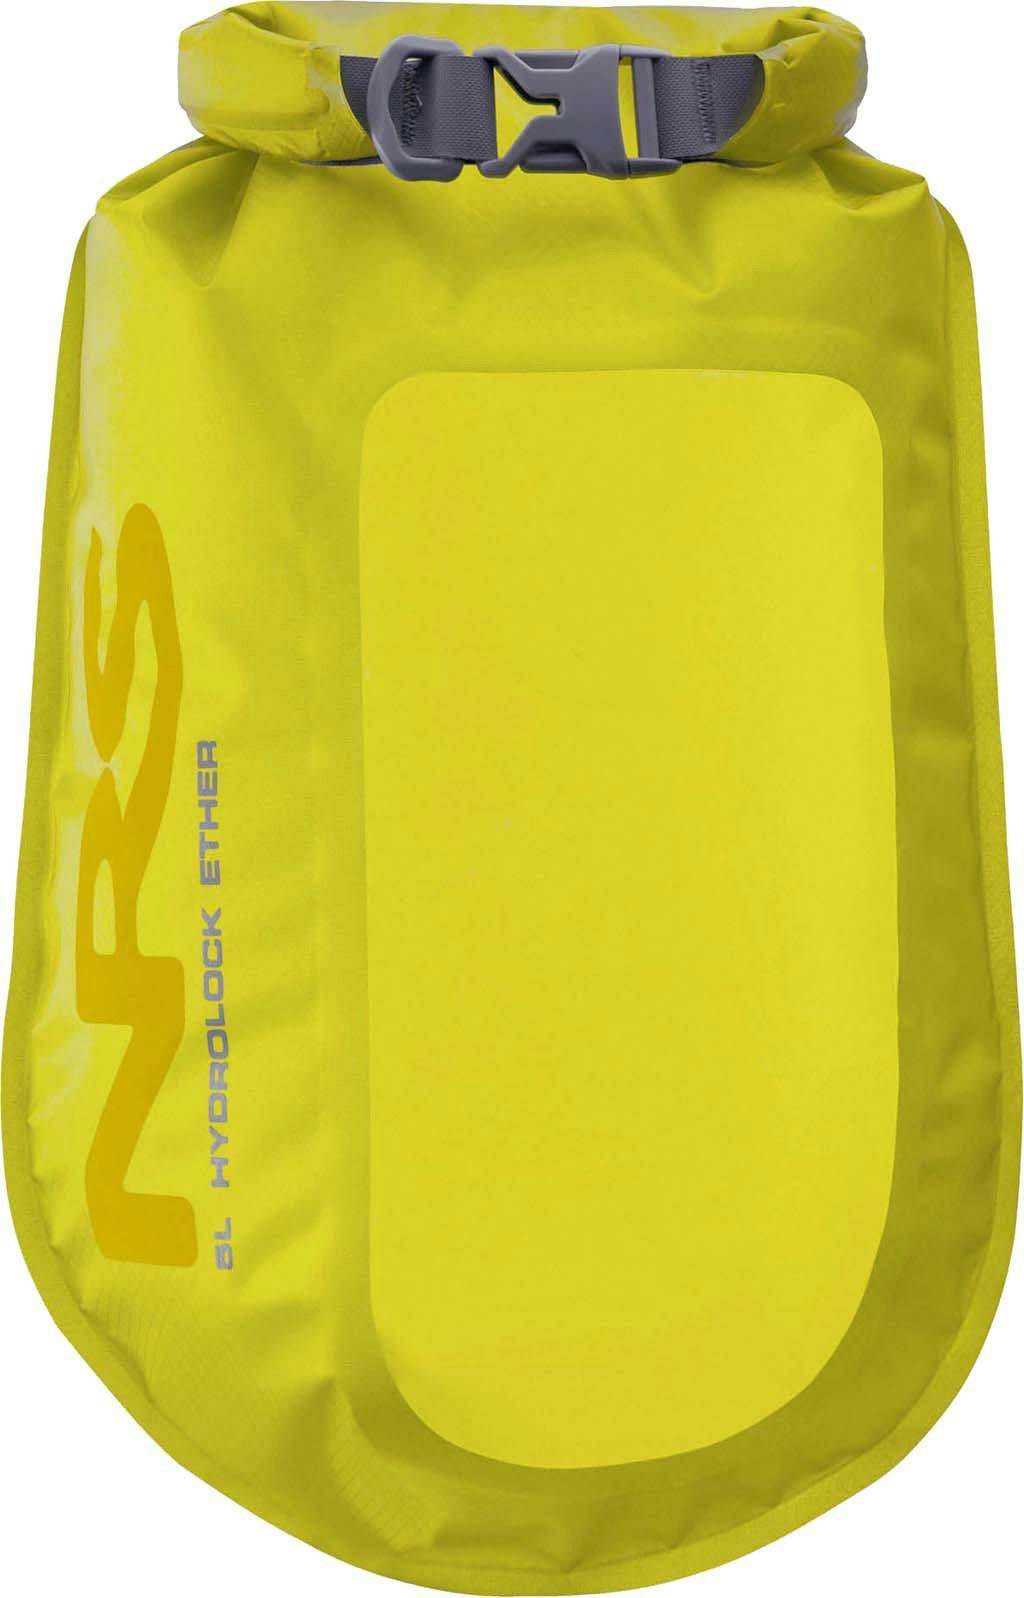 Product image for NRS Ether HydroLock Dry Bag 5L